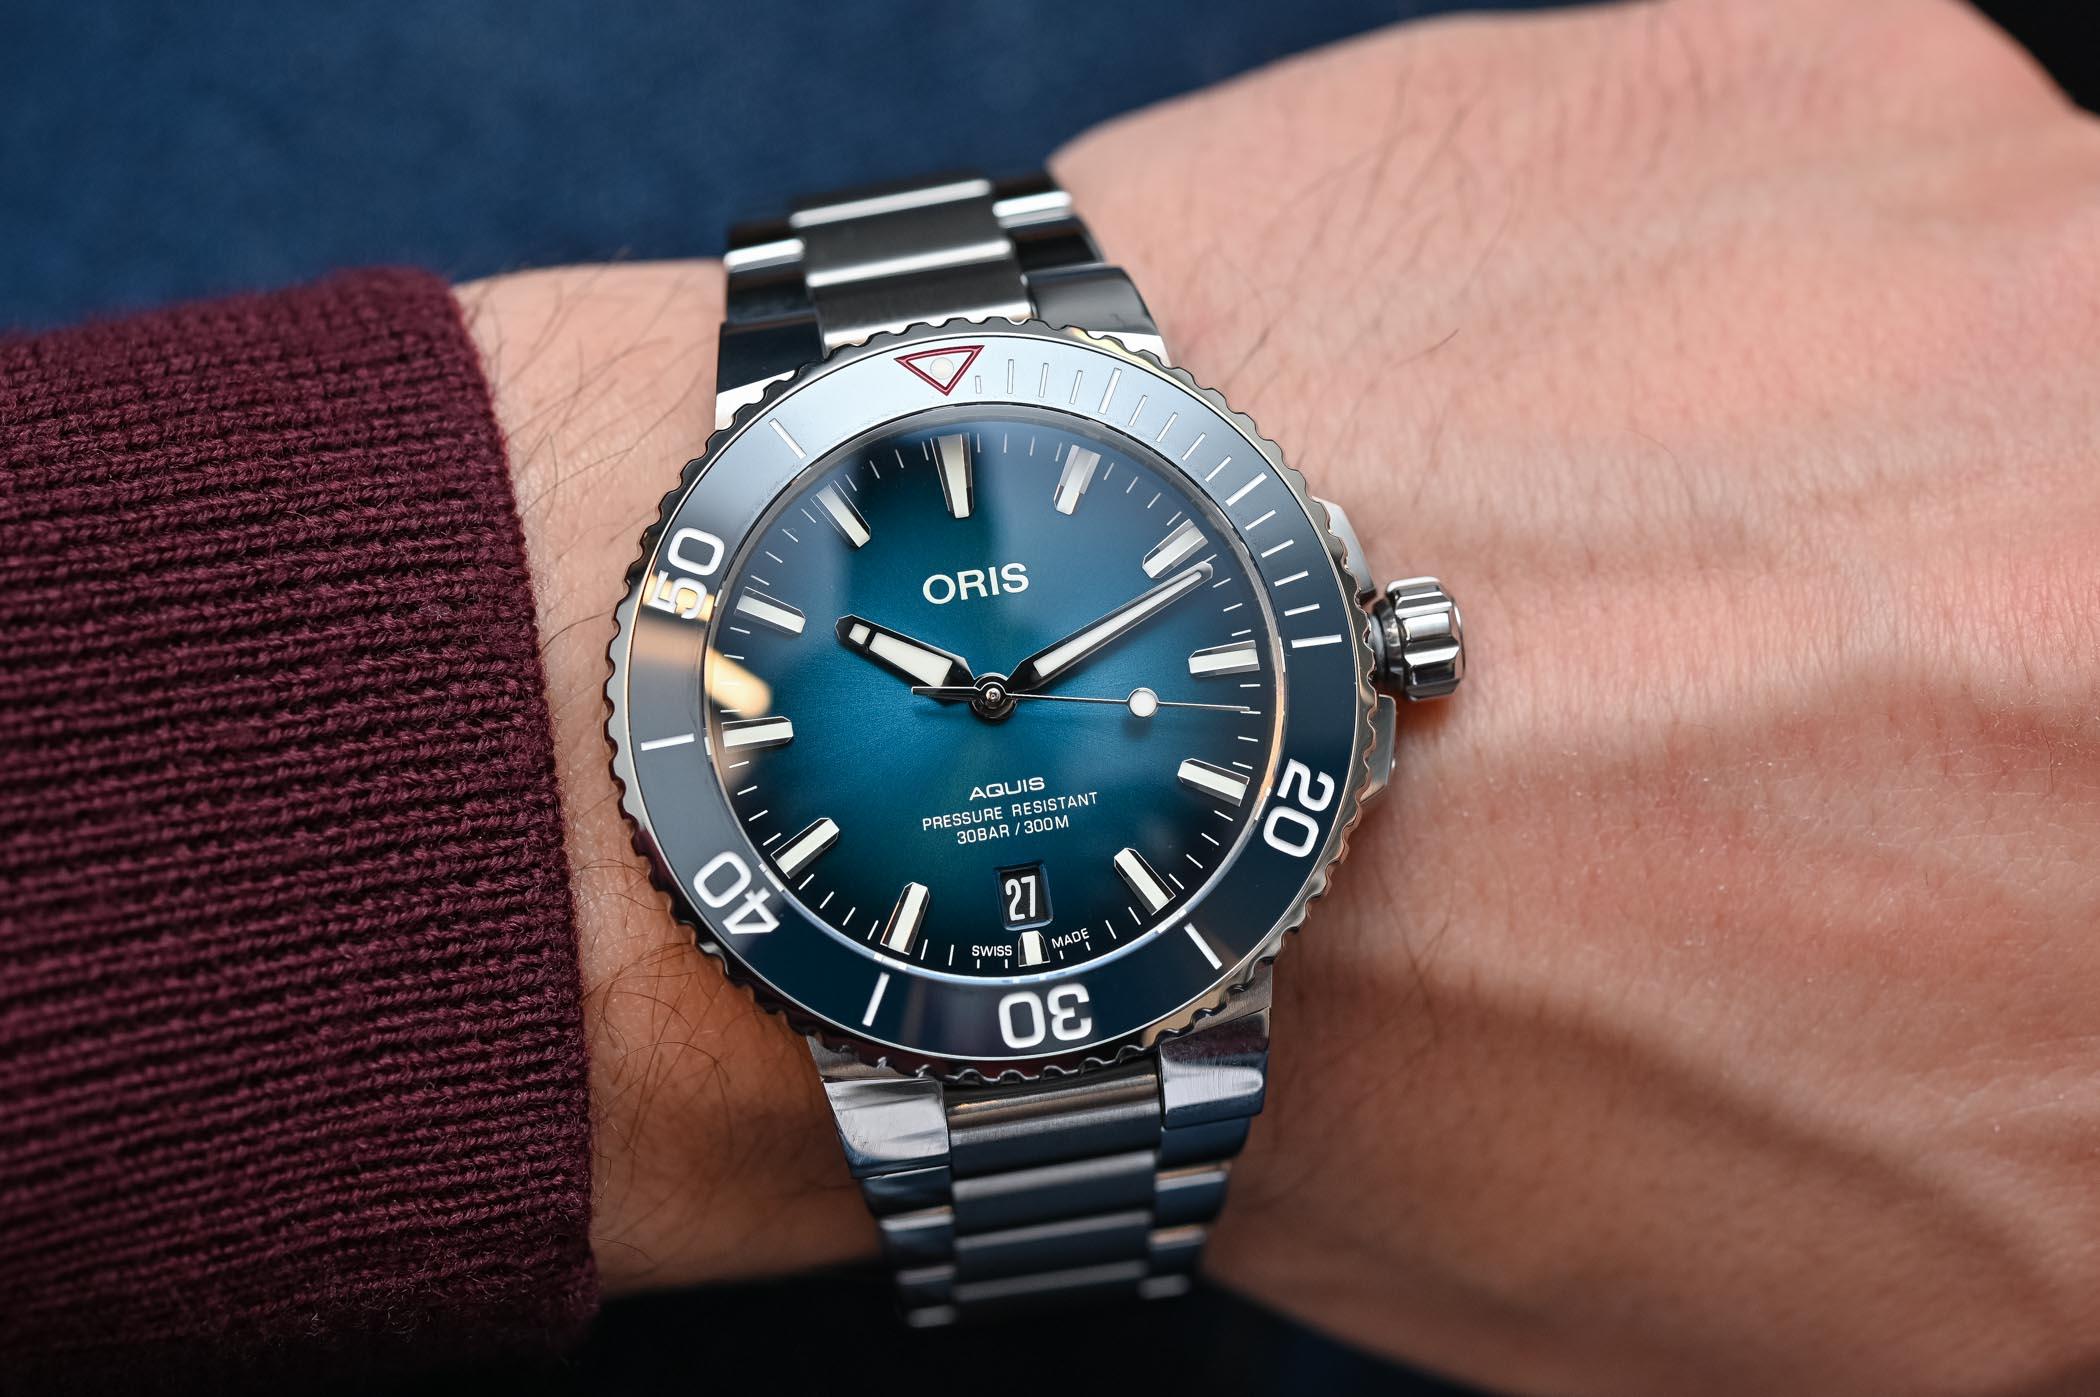 Video - The Oris Watches of Baselworld 2019 Explained by Co-CEO Rolf Studer